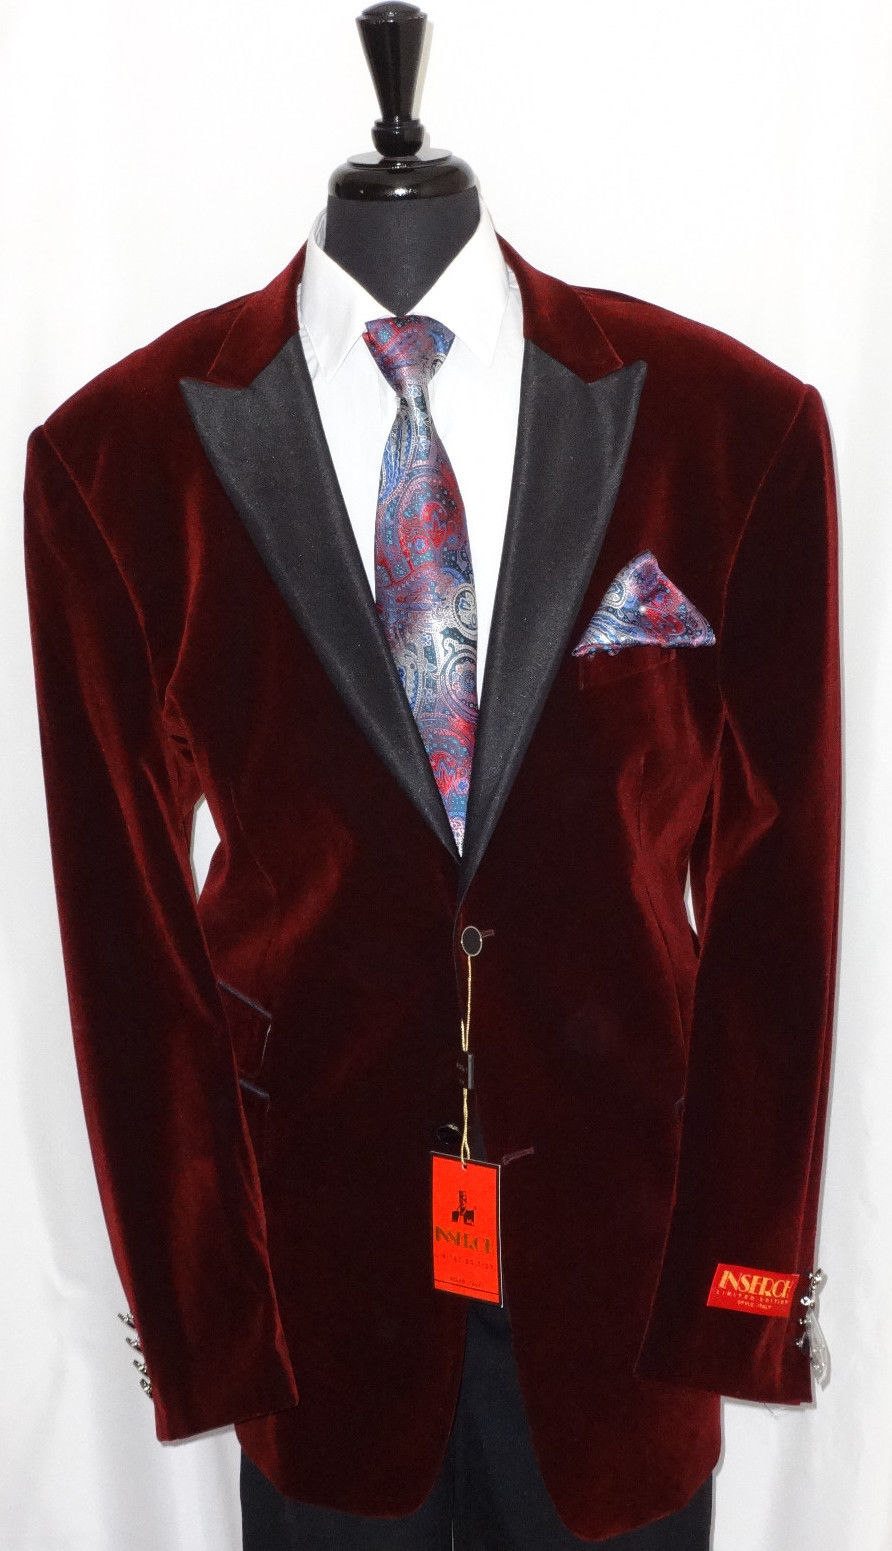 Lv velvet jacket, Men's Fashion, Coats, Jackets and Outerwear on